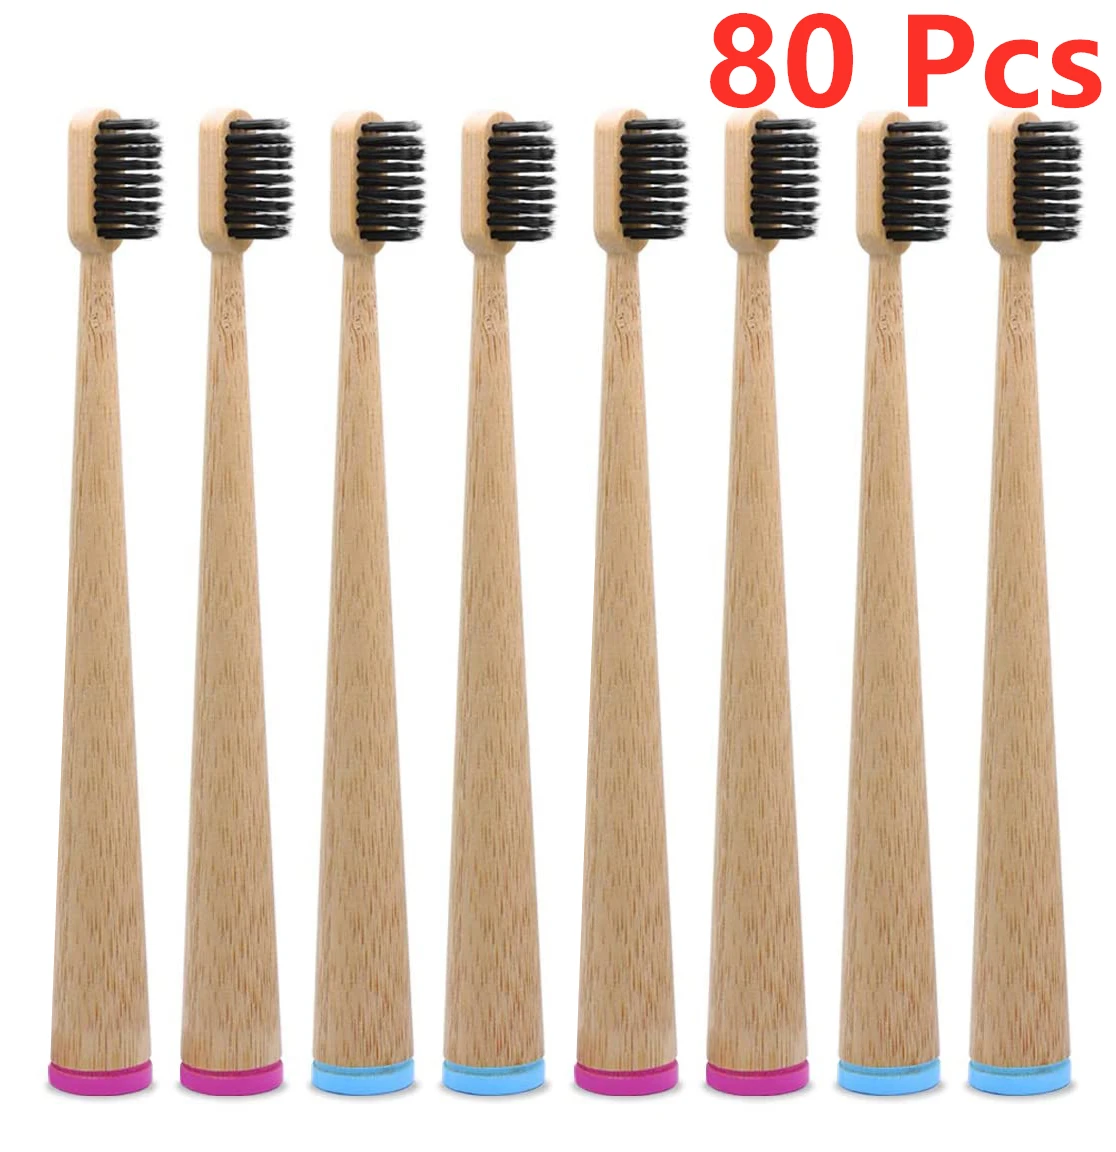 80 Pcs Stand Up Biodegradable Bamboo toothbrushes Hard Wearing, Soft/Medium Plant bristles Plastic Free Toothbrush All Natural